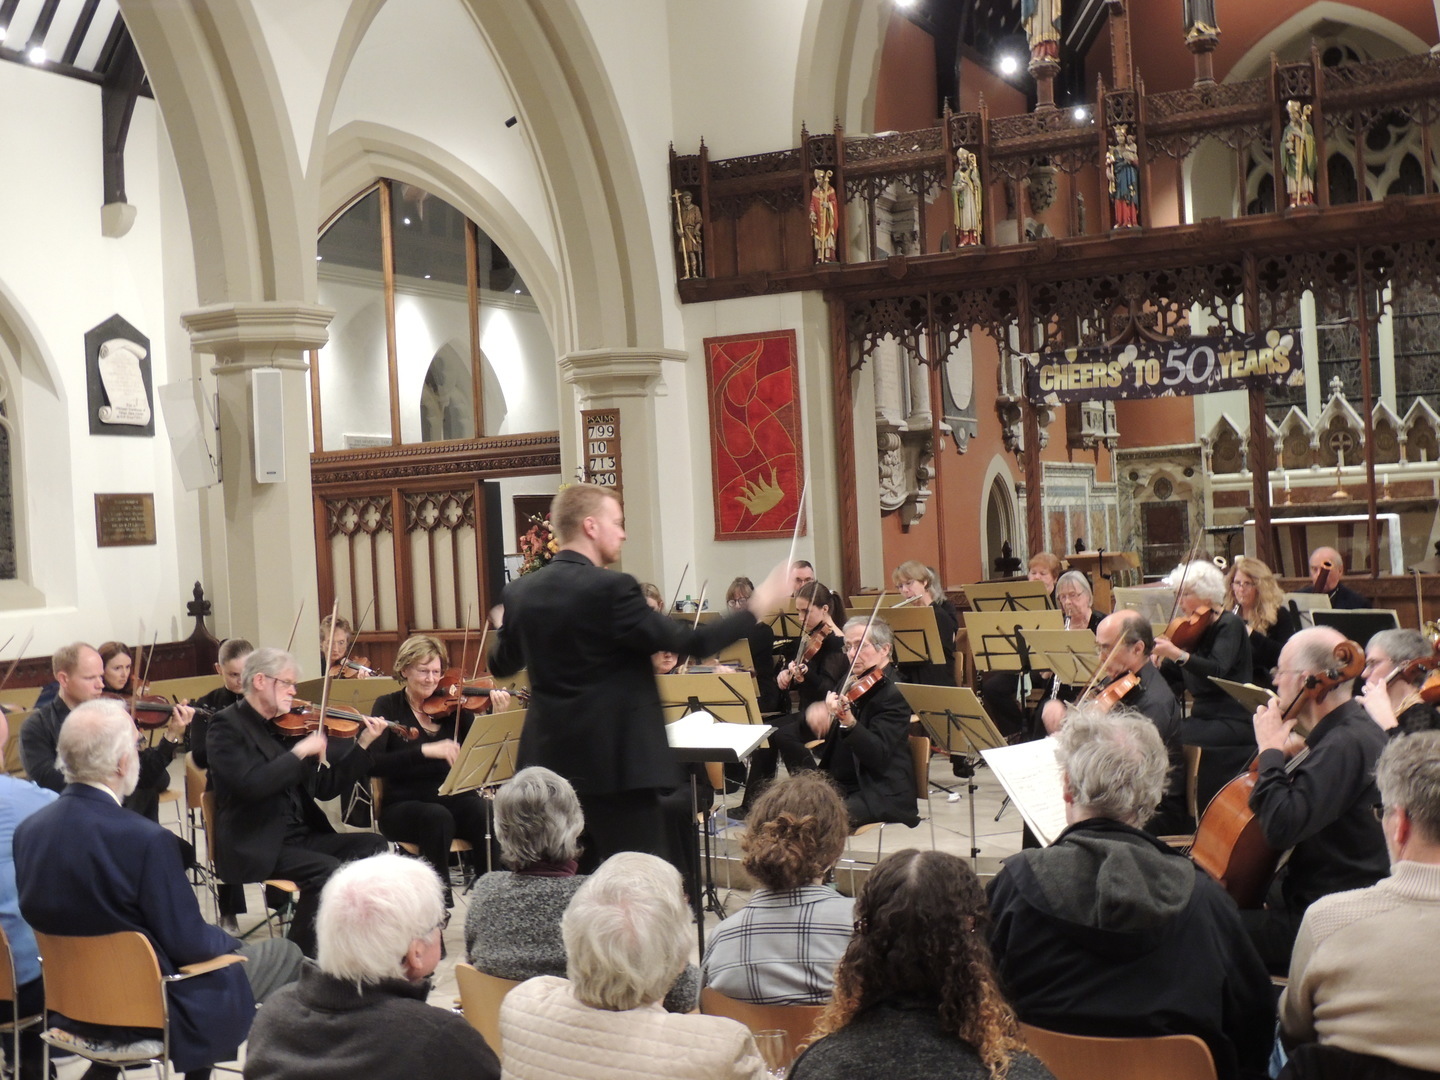 Langtree Sinfonia plays Beethoven Violin Concerto, Wallingford, Oxfordshire, United Kingdom